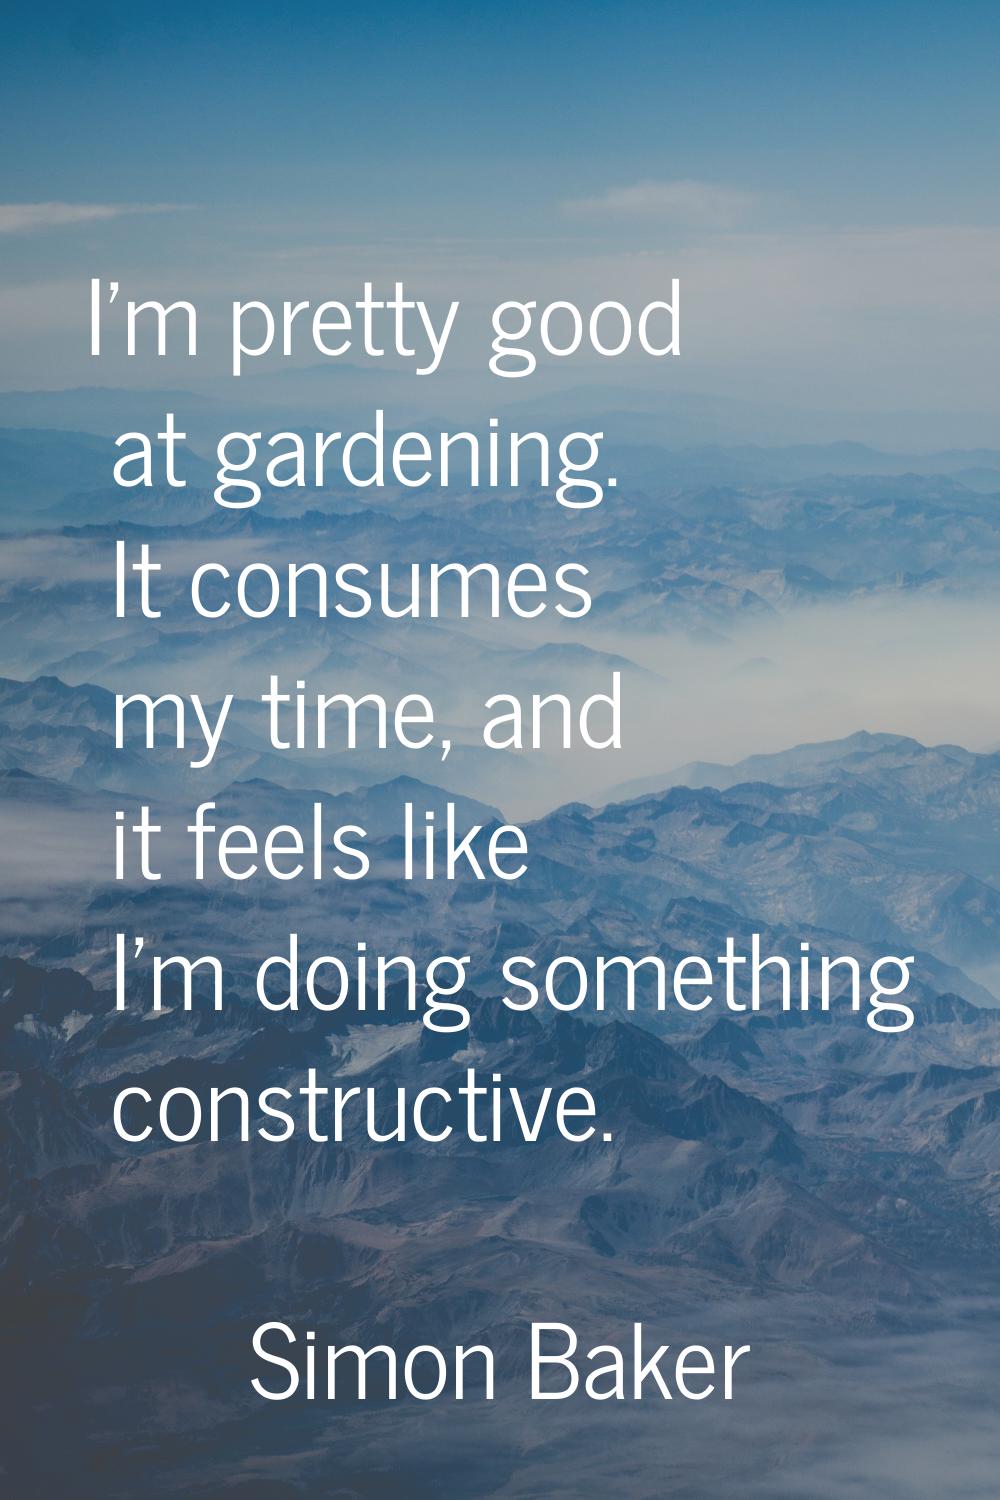 I'm pretty good at gardening. It consumes my time, and it feels like I'm doing something constructi